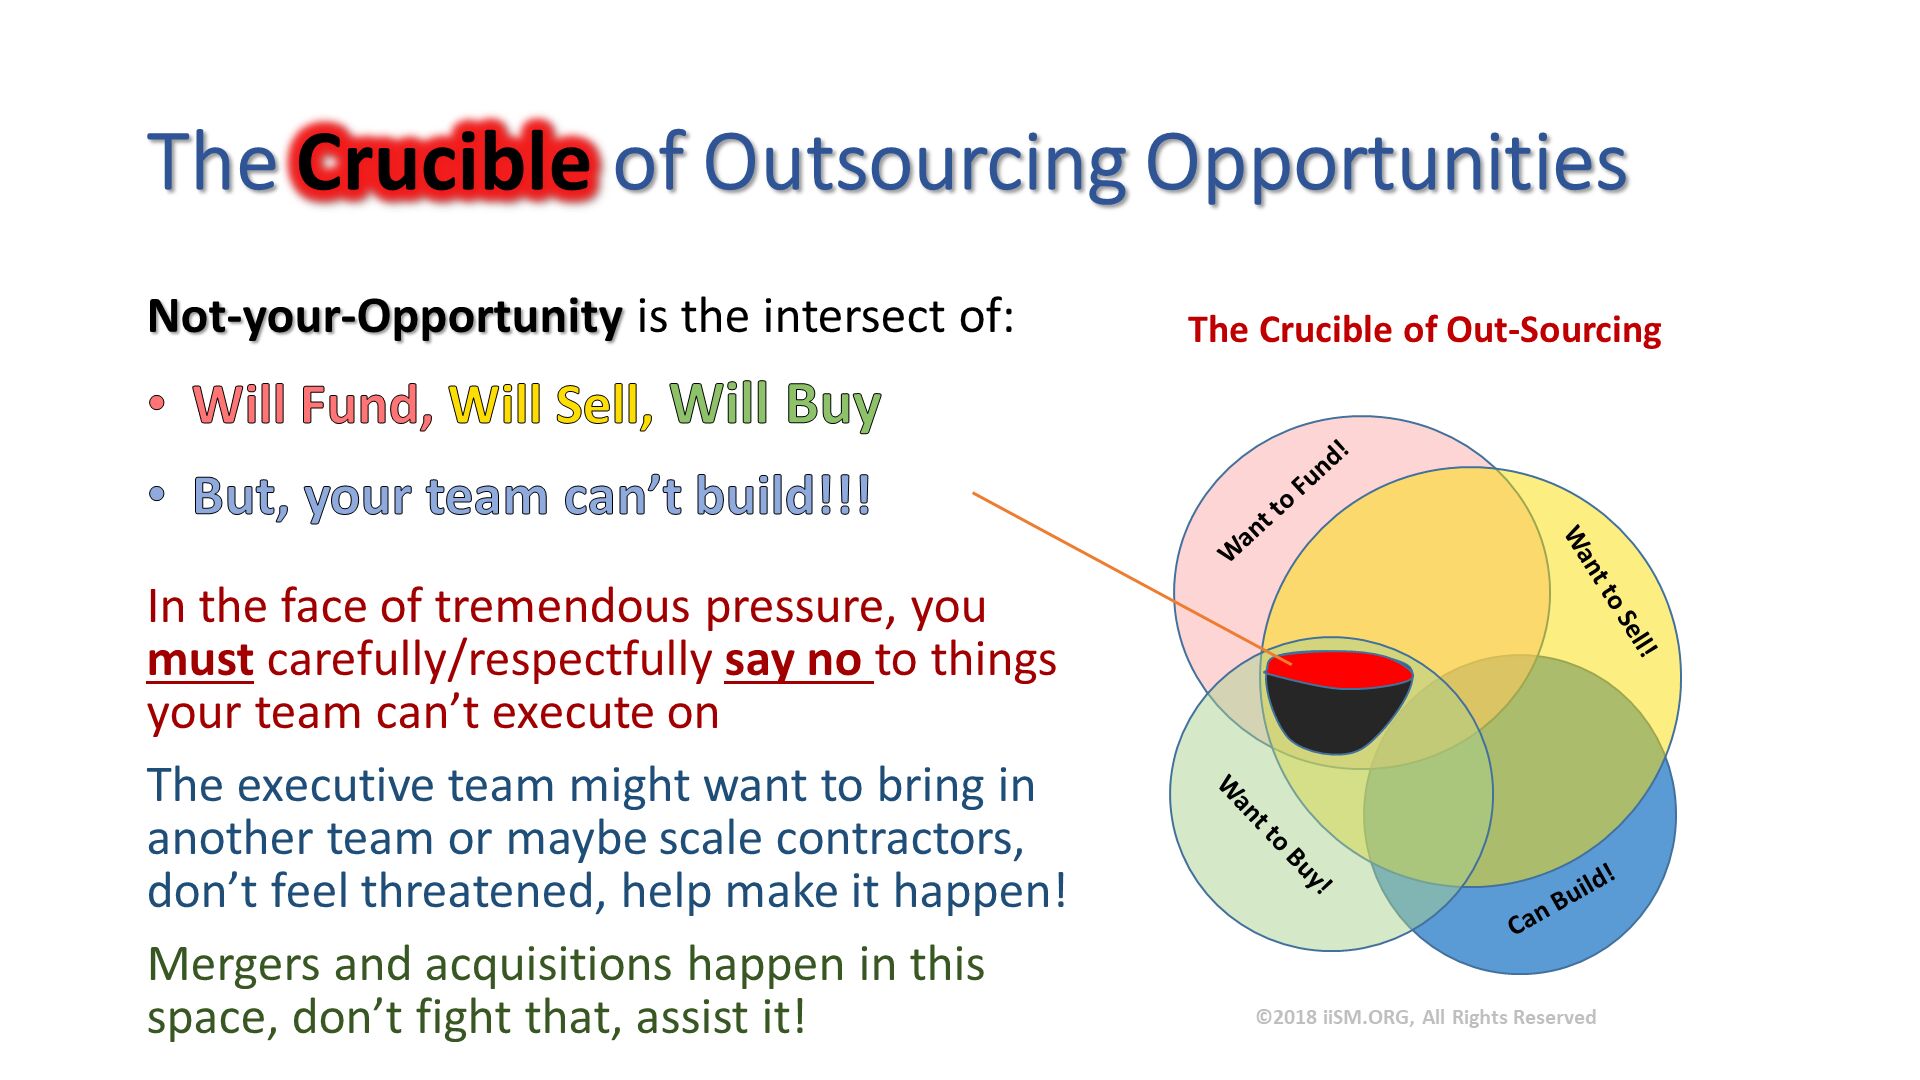 The Crucible of Outsourcing Opportunities. Not-your-Opportunity is the intersect of:
Will Fund, Will Sell, Will Buy
But, your team can’t build!!!

In the face of tremendous pressure, you must carefully/respectfully say no to things your team can’t execute on
The executive team might want to bring in another team or maybe scale contractors, don’t feel threatened, help make it happen!
Mergers and acquisitions happen in this space, don’t fight that, assist it!
. 